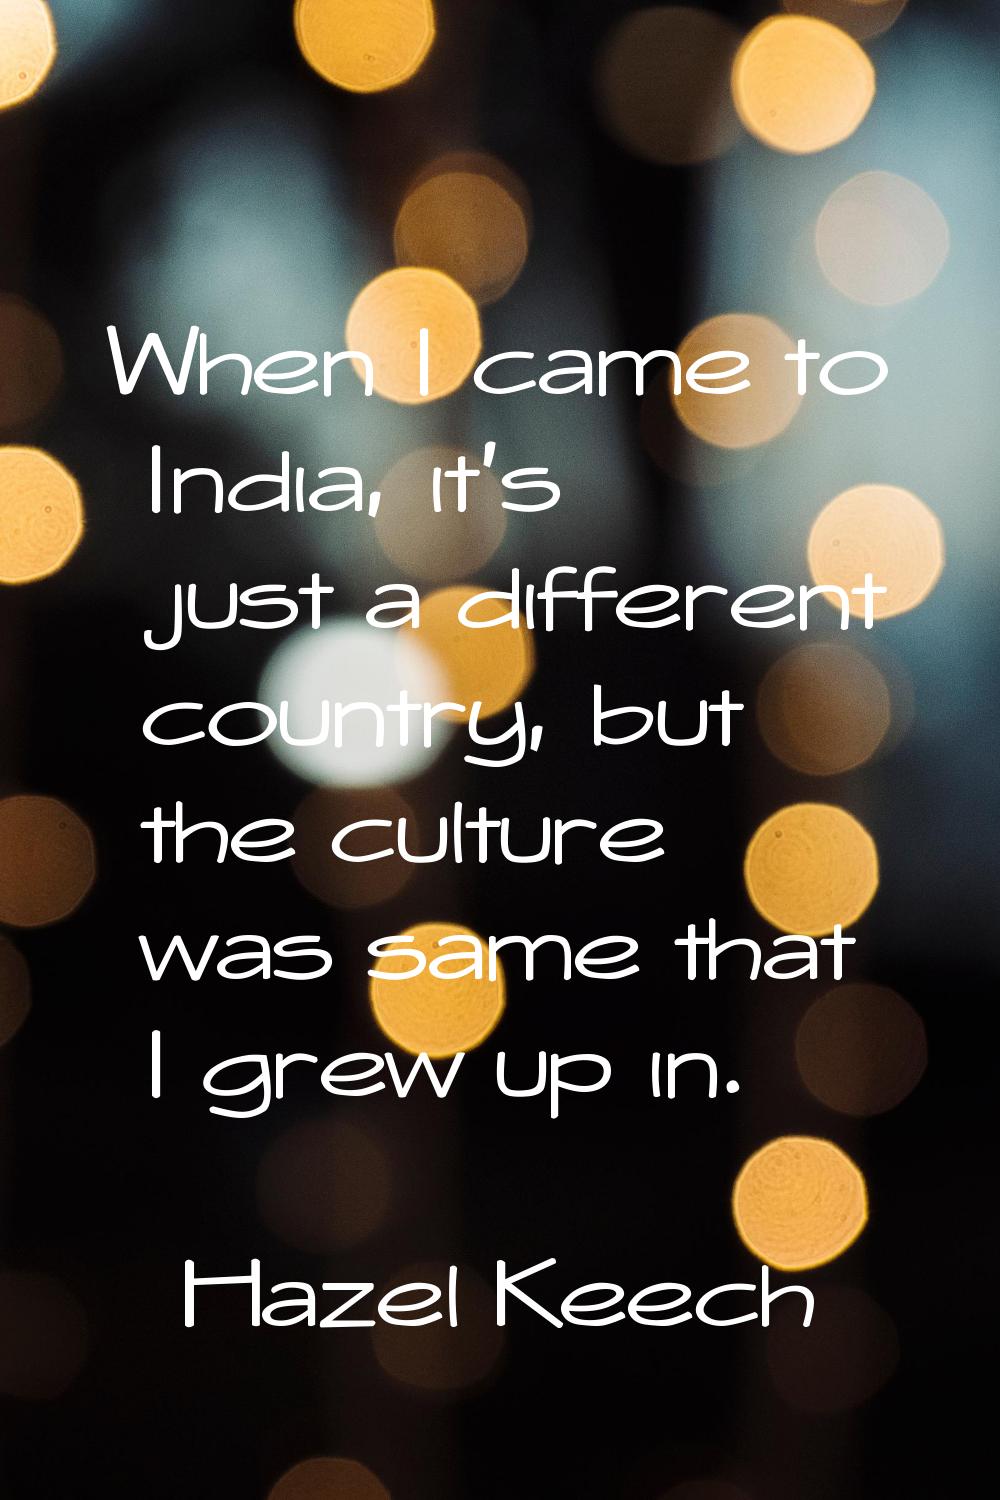 When I came to India, it's just a different country, but the culture was same that I grew up in.